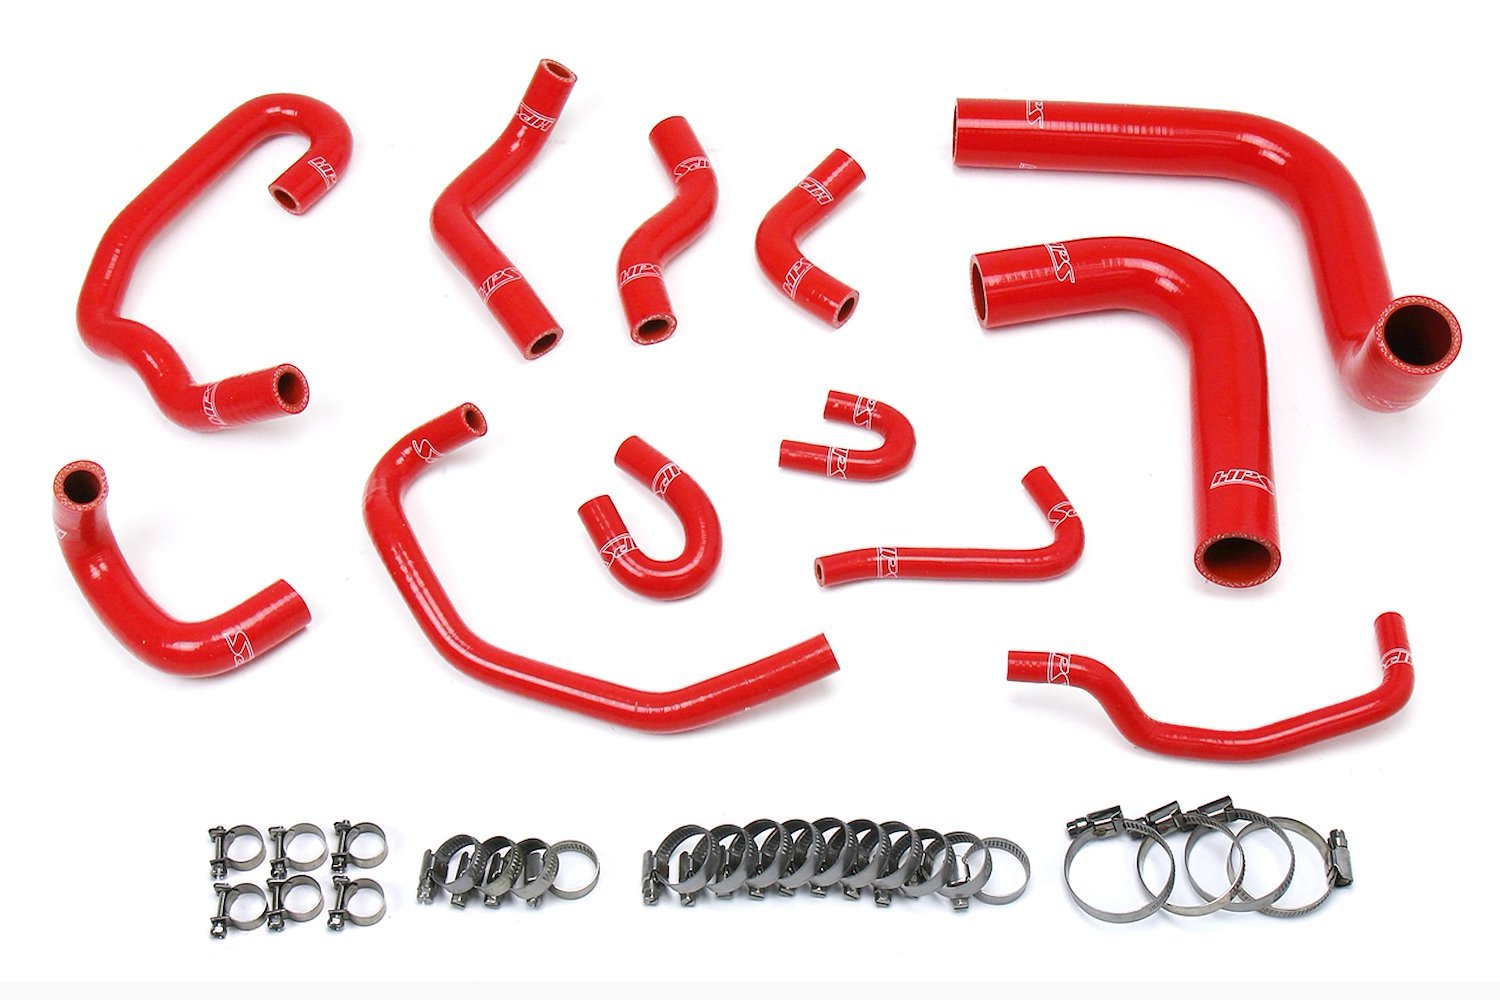 57-1654-RED Coolant Hose Kit, High-Temp 3-Ply Reinforced Silicone, Replace Rubber Radiator Heater Coolant Hoses